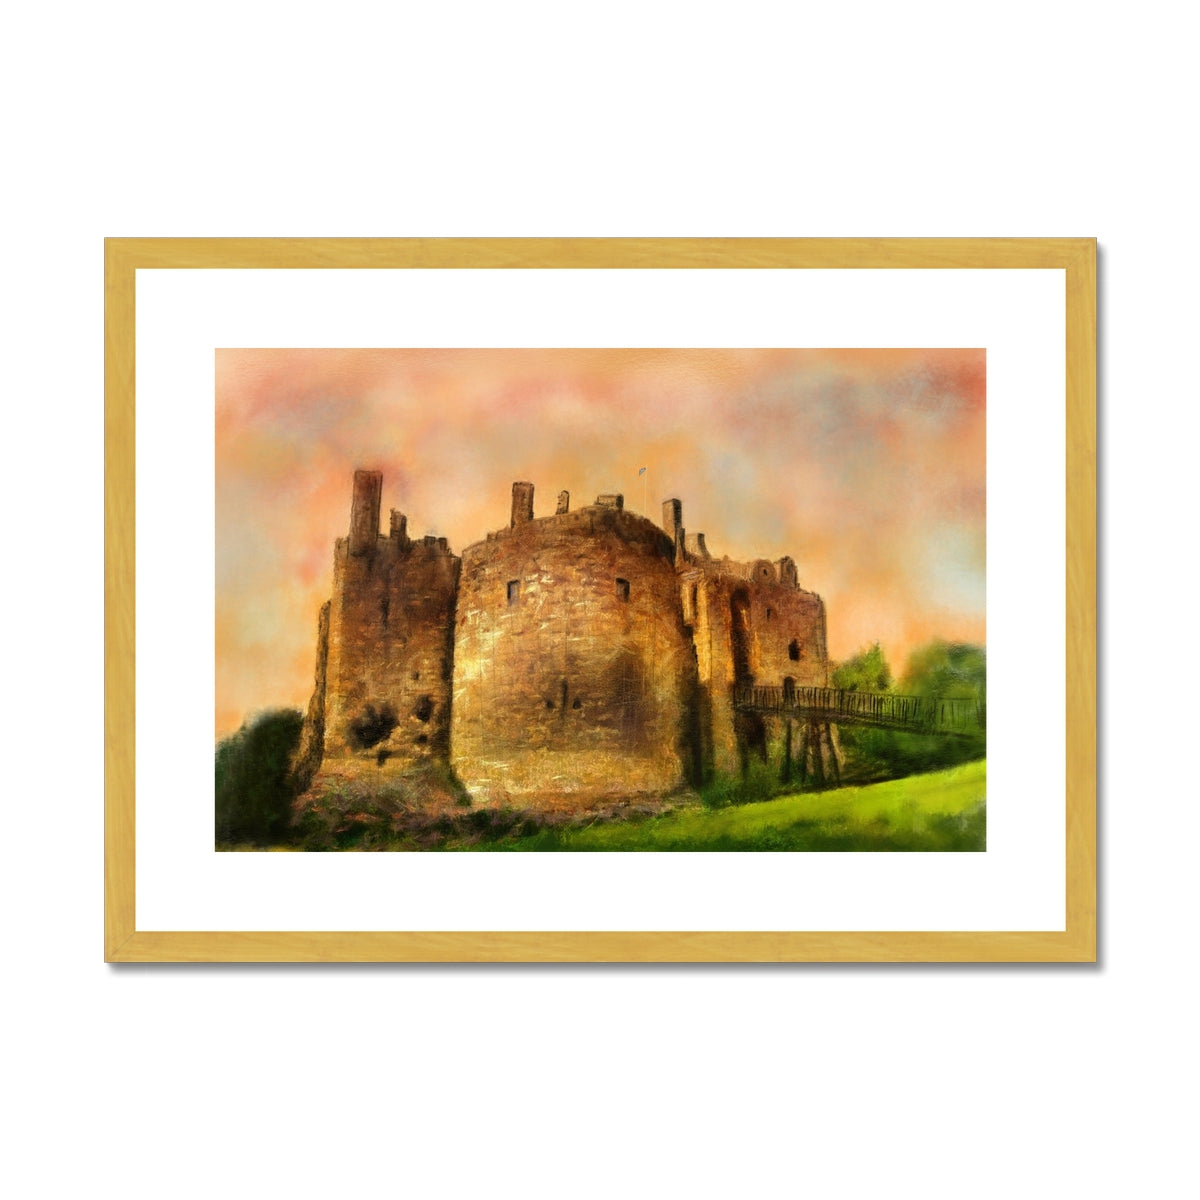 Dirleton Castle Dusk Painting | Antique Framed & Mounted Prints From Scotland-Antique Framed & Mounted Prints-Historic & Iconic Scotland Art Gallery-A2 Landscape-Gold Frame-Paintings, Prints, Homeware, Art Gifts From Scotland By Scottish Artist Kevin Hunter